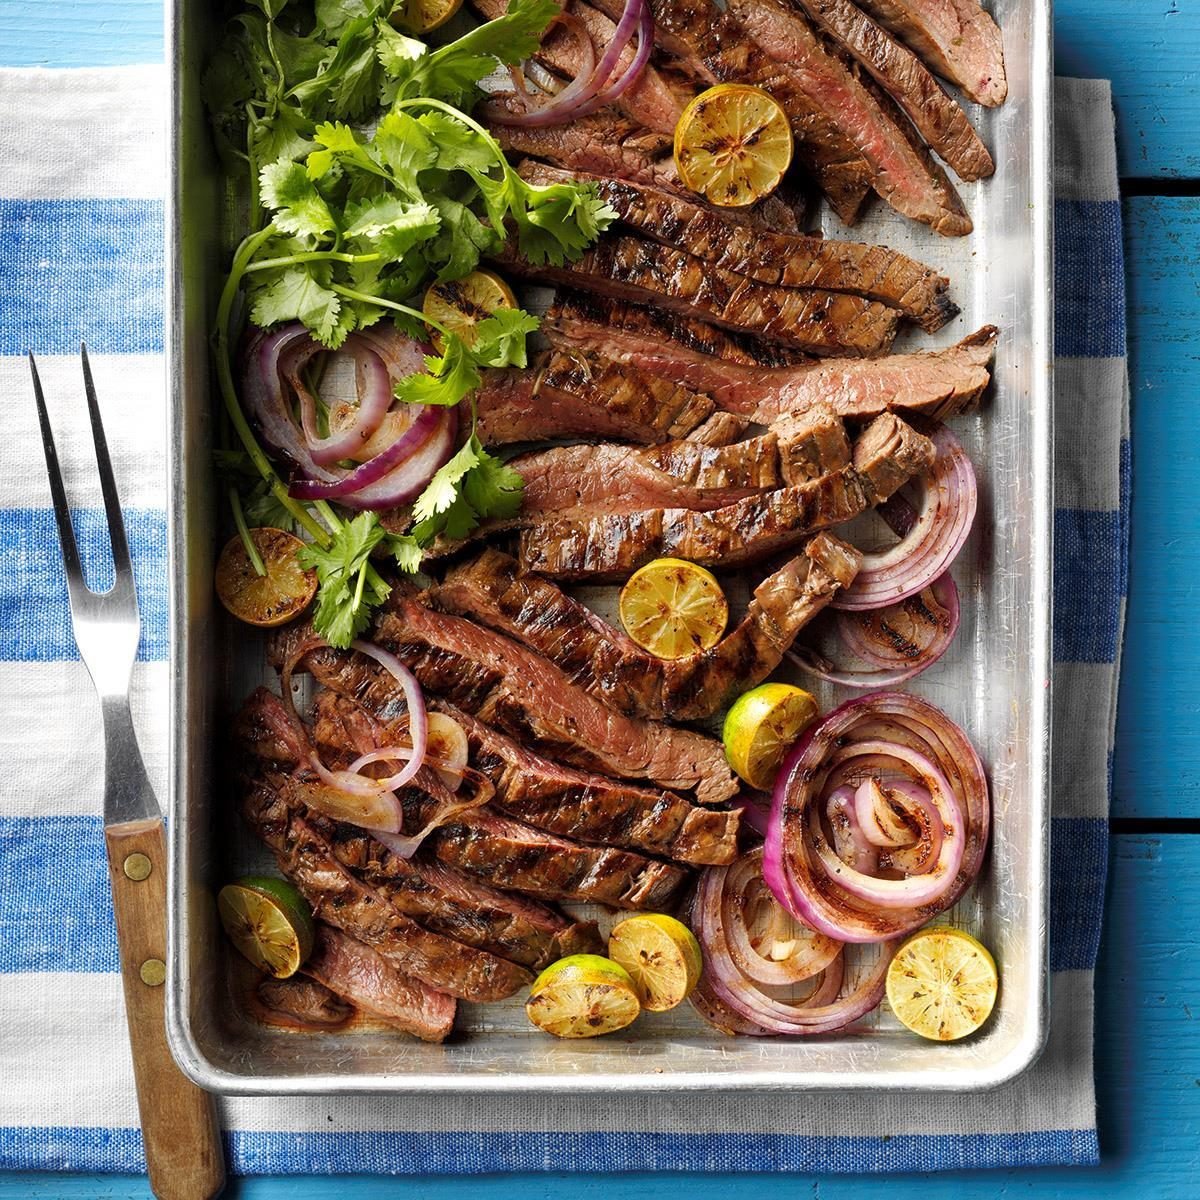 70 Best Grilling Recipes - Easy Dinner Ideas to Cook on the Grill